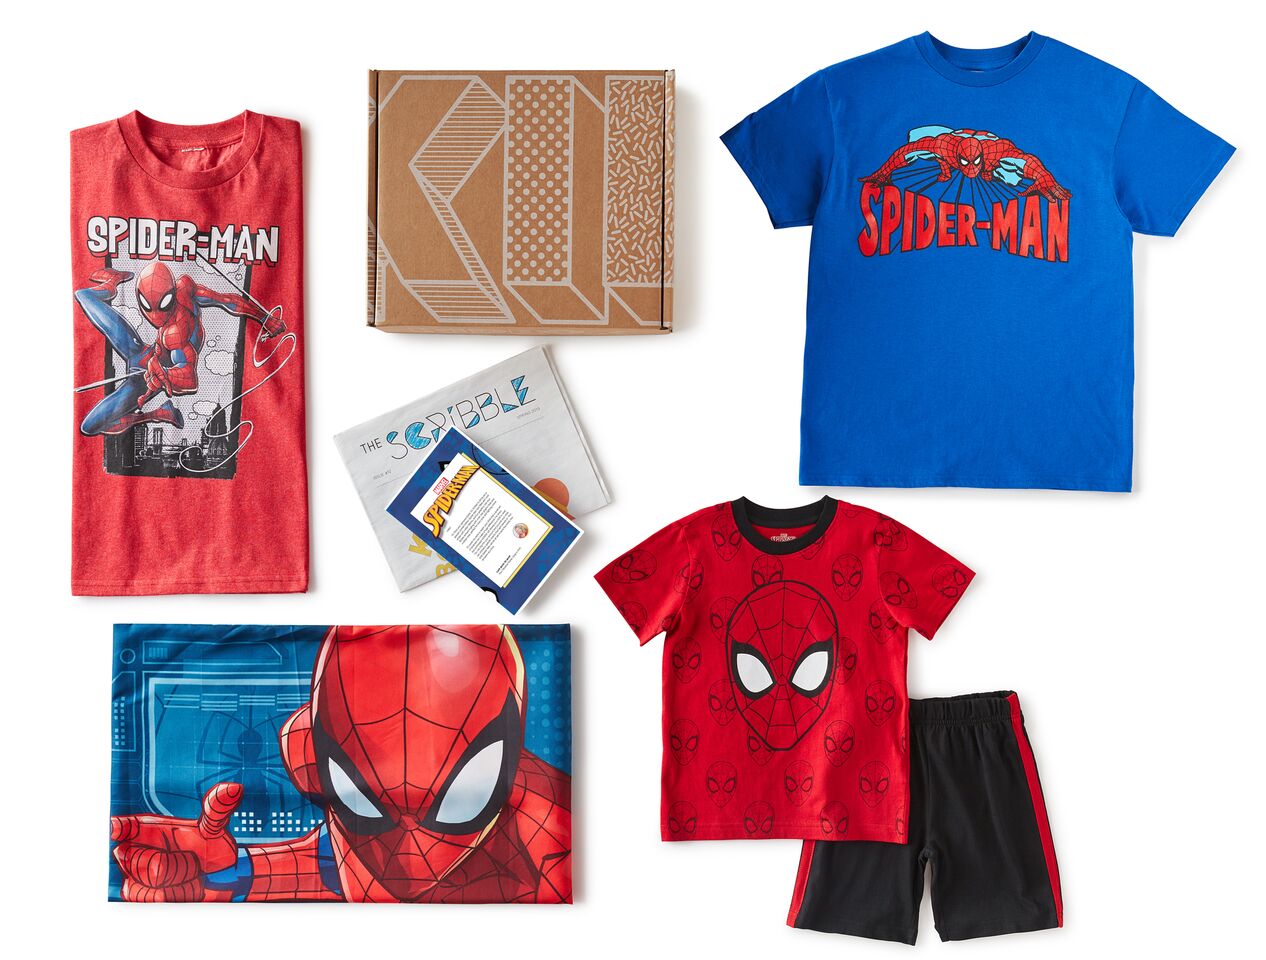 KIDBOX Launches Disney, Star Wars and Marvel Themed Style Boxes